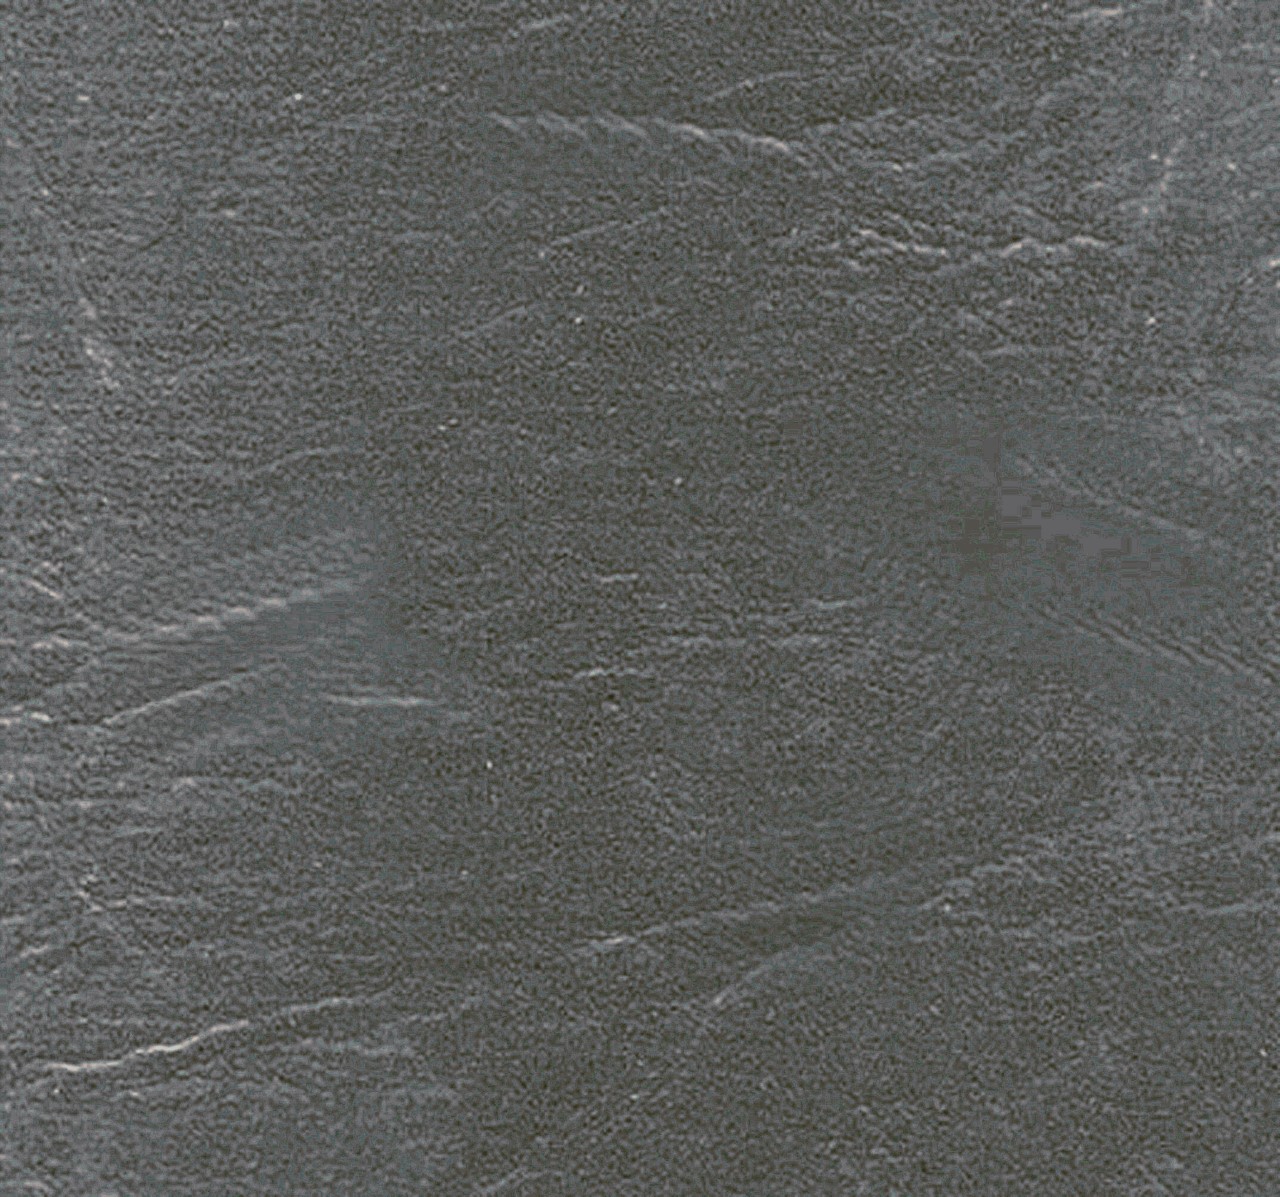 Leather-like Vinyl Upholstery Charcoal Grey 54" wide - Per Yard